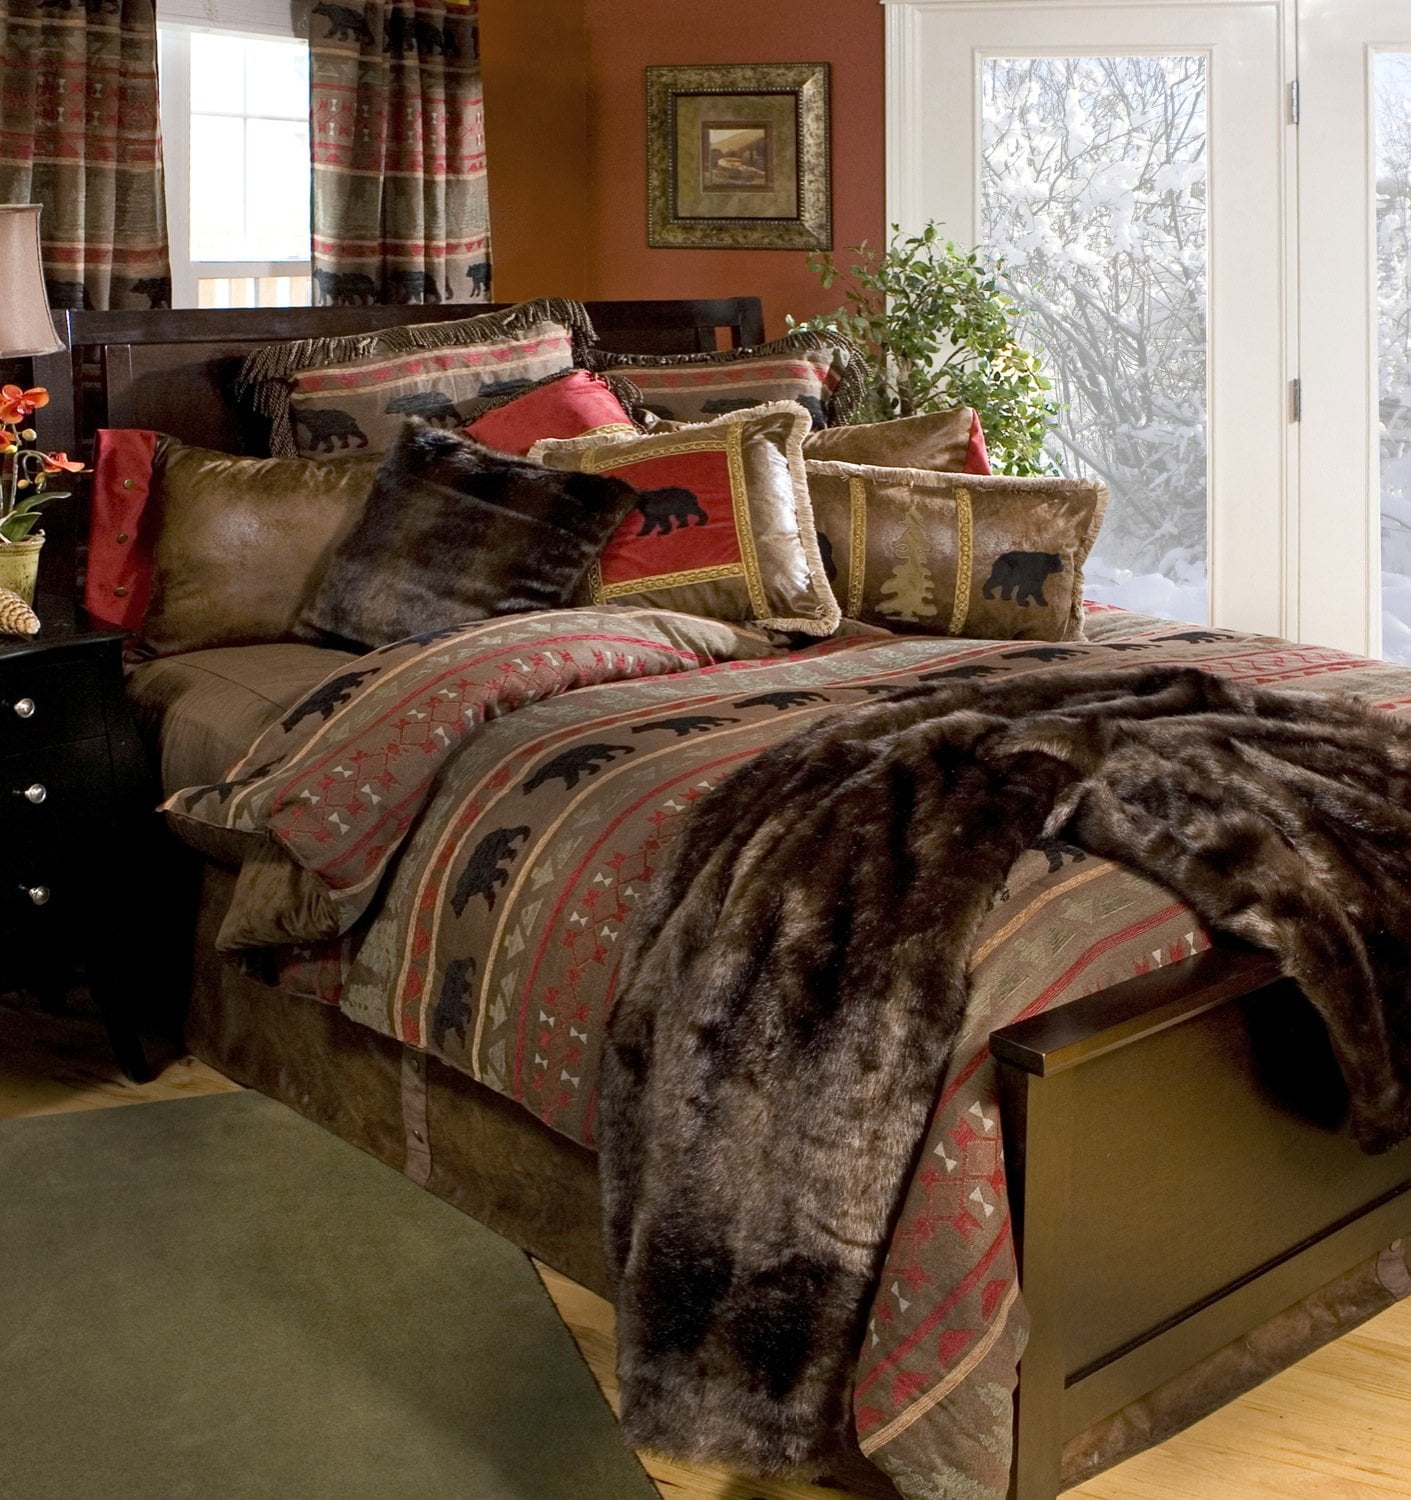 Lodge And Cabin Bedding Image to u